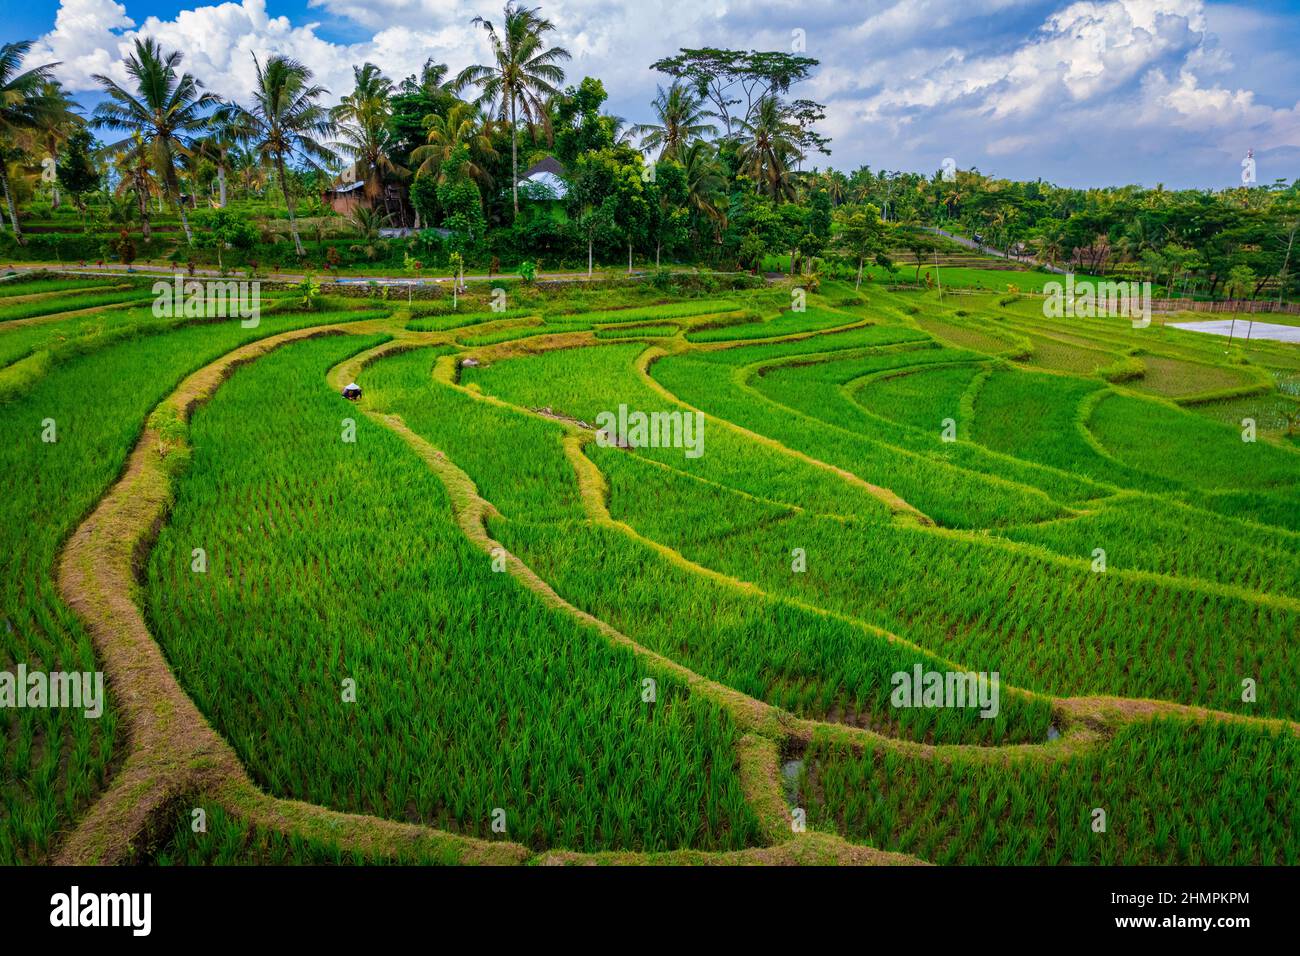 Farmer working in a tropical rice field, Lombok, Indonesia Stock Photo